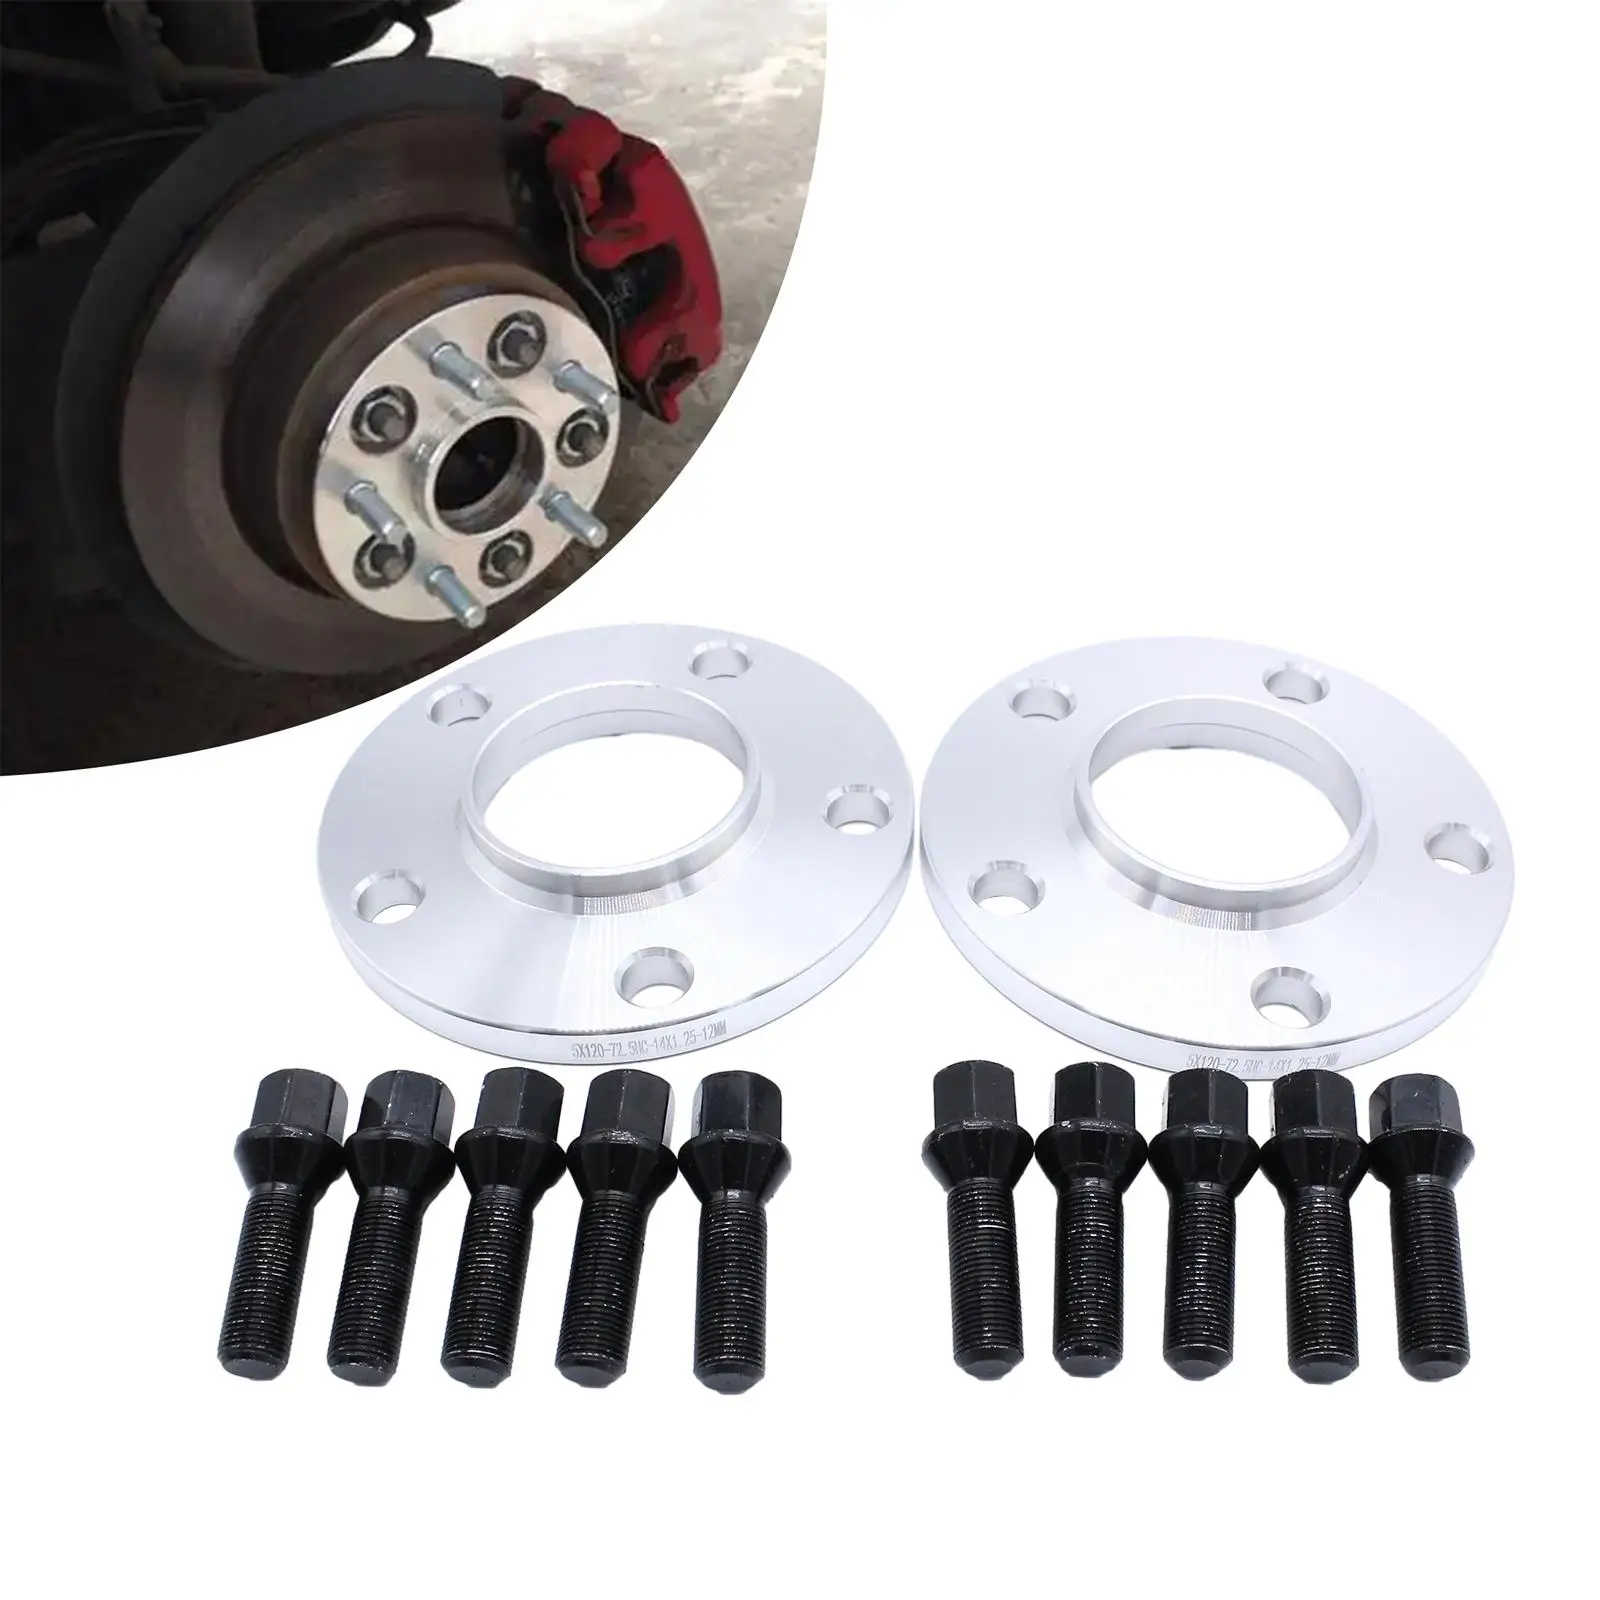 2 Pieces Wheel Spacers Replaces Metal Hubcentric Forged Spacers Wheel Accessories Center Bore 72.5mm for Ford Ranger